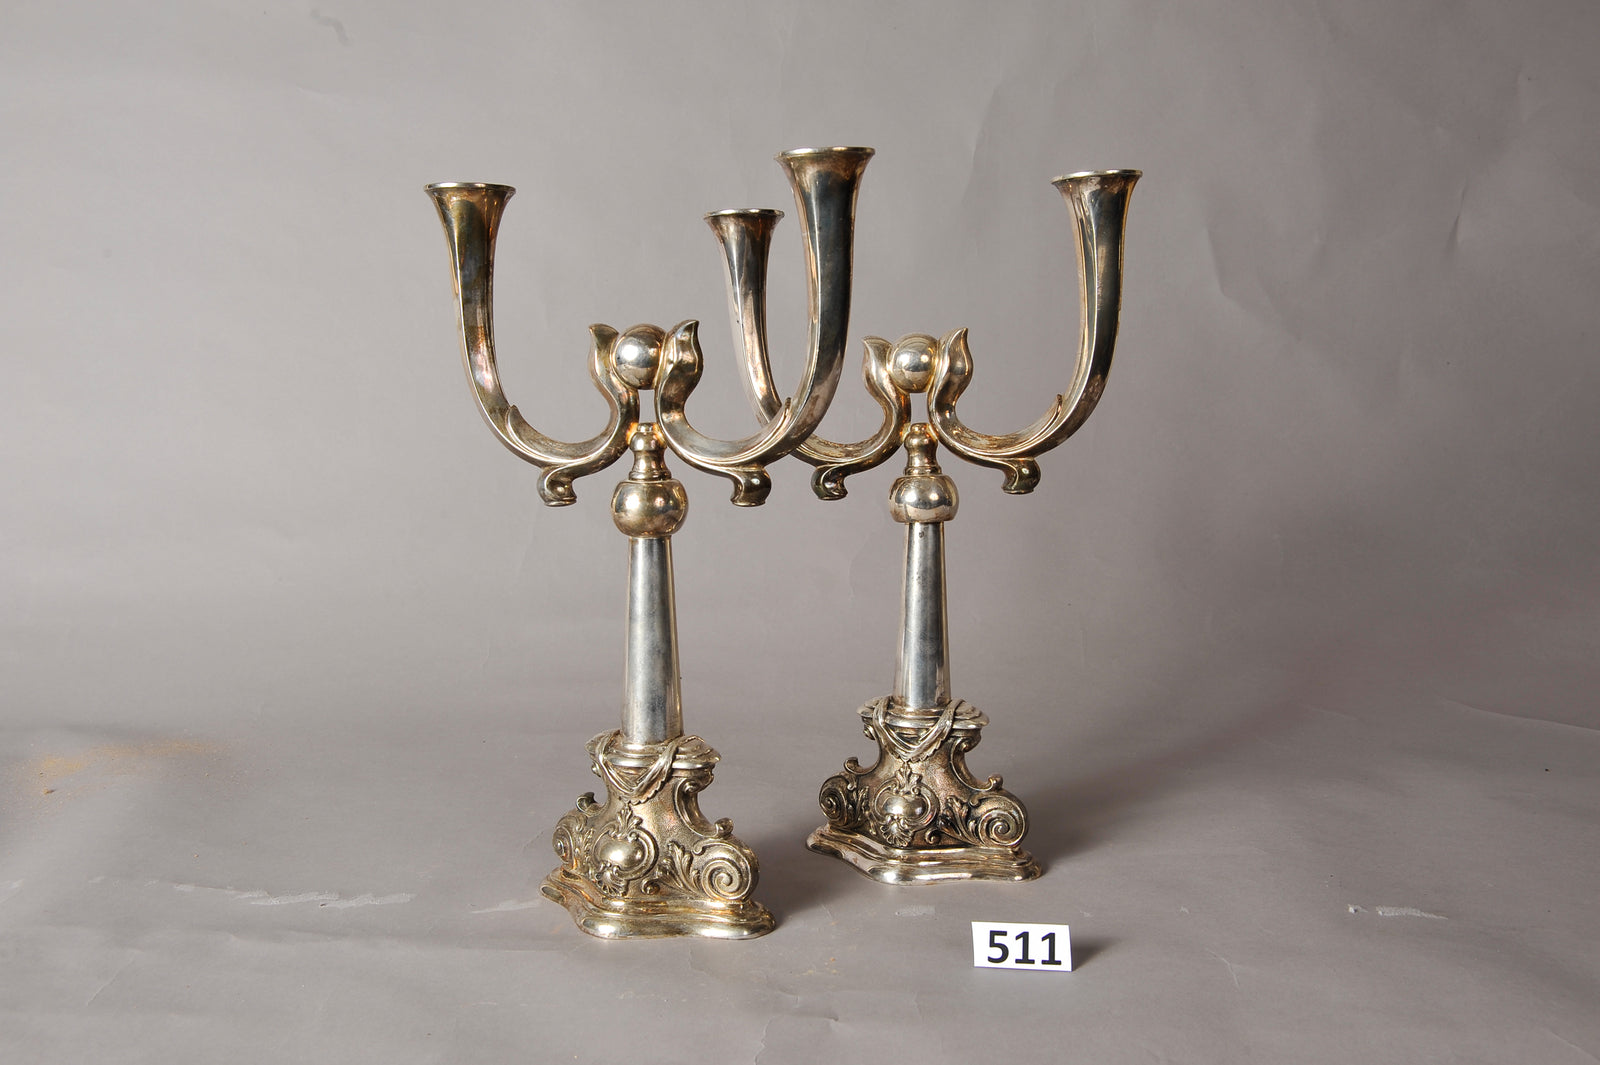 A Pair of Candelholders